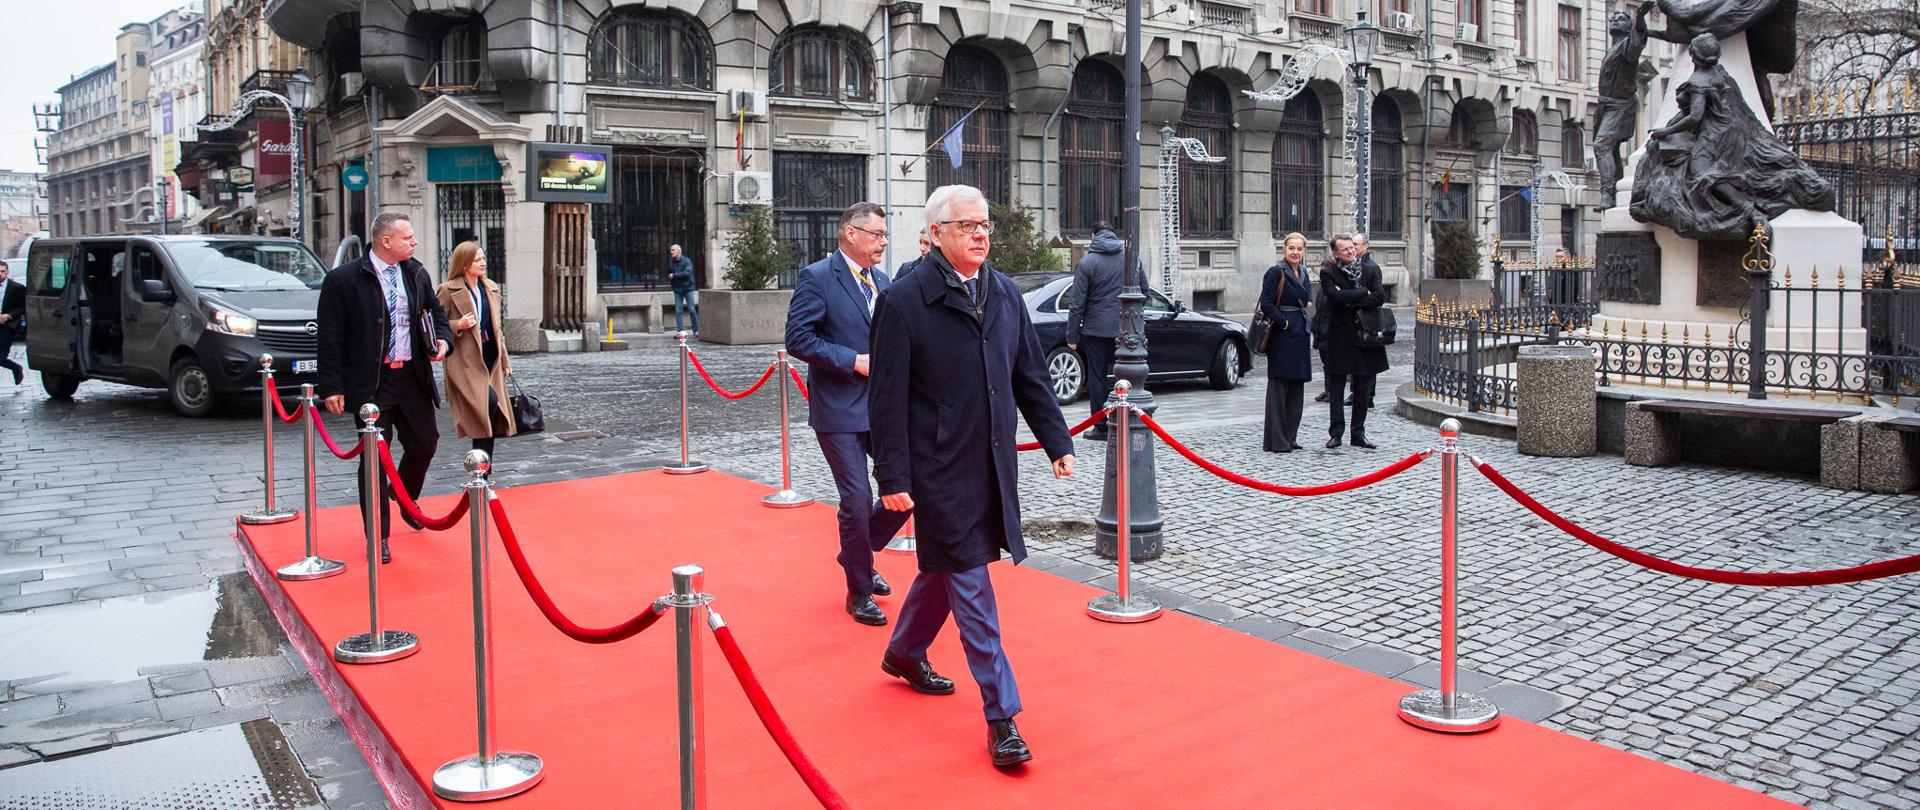 Minister Jacek Czaputowicz attends Gymnich meeting of EU foreign ministers